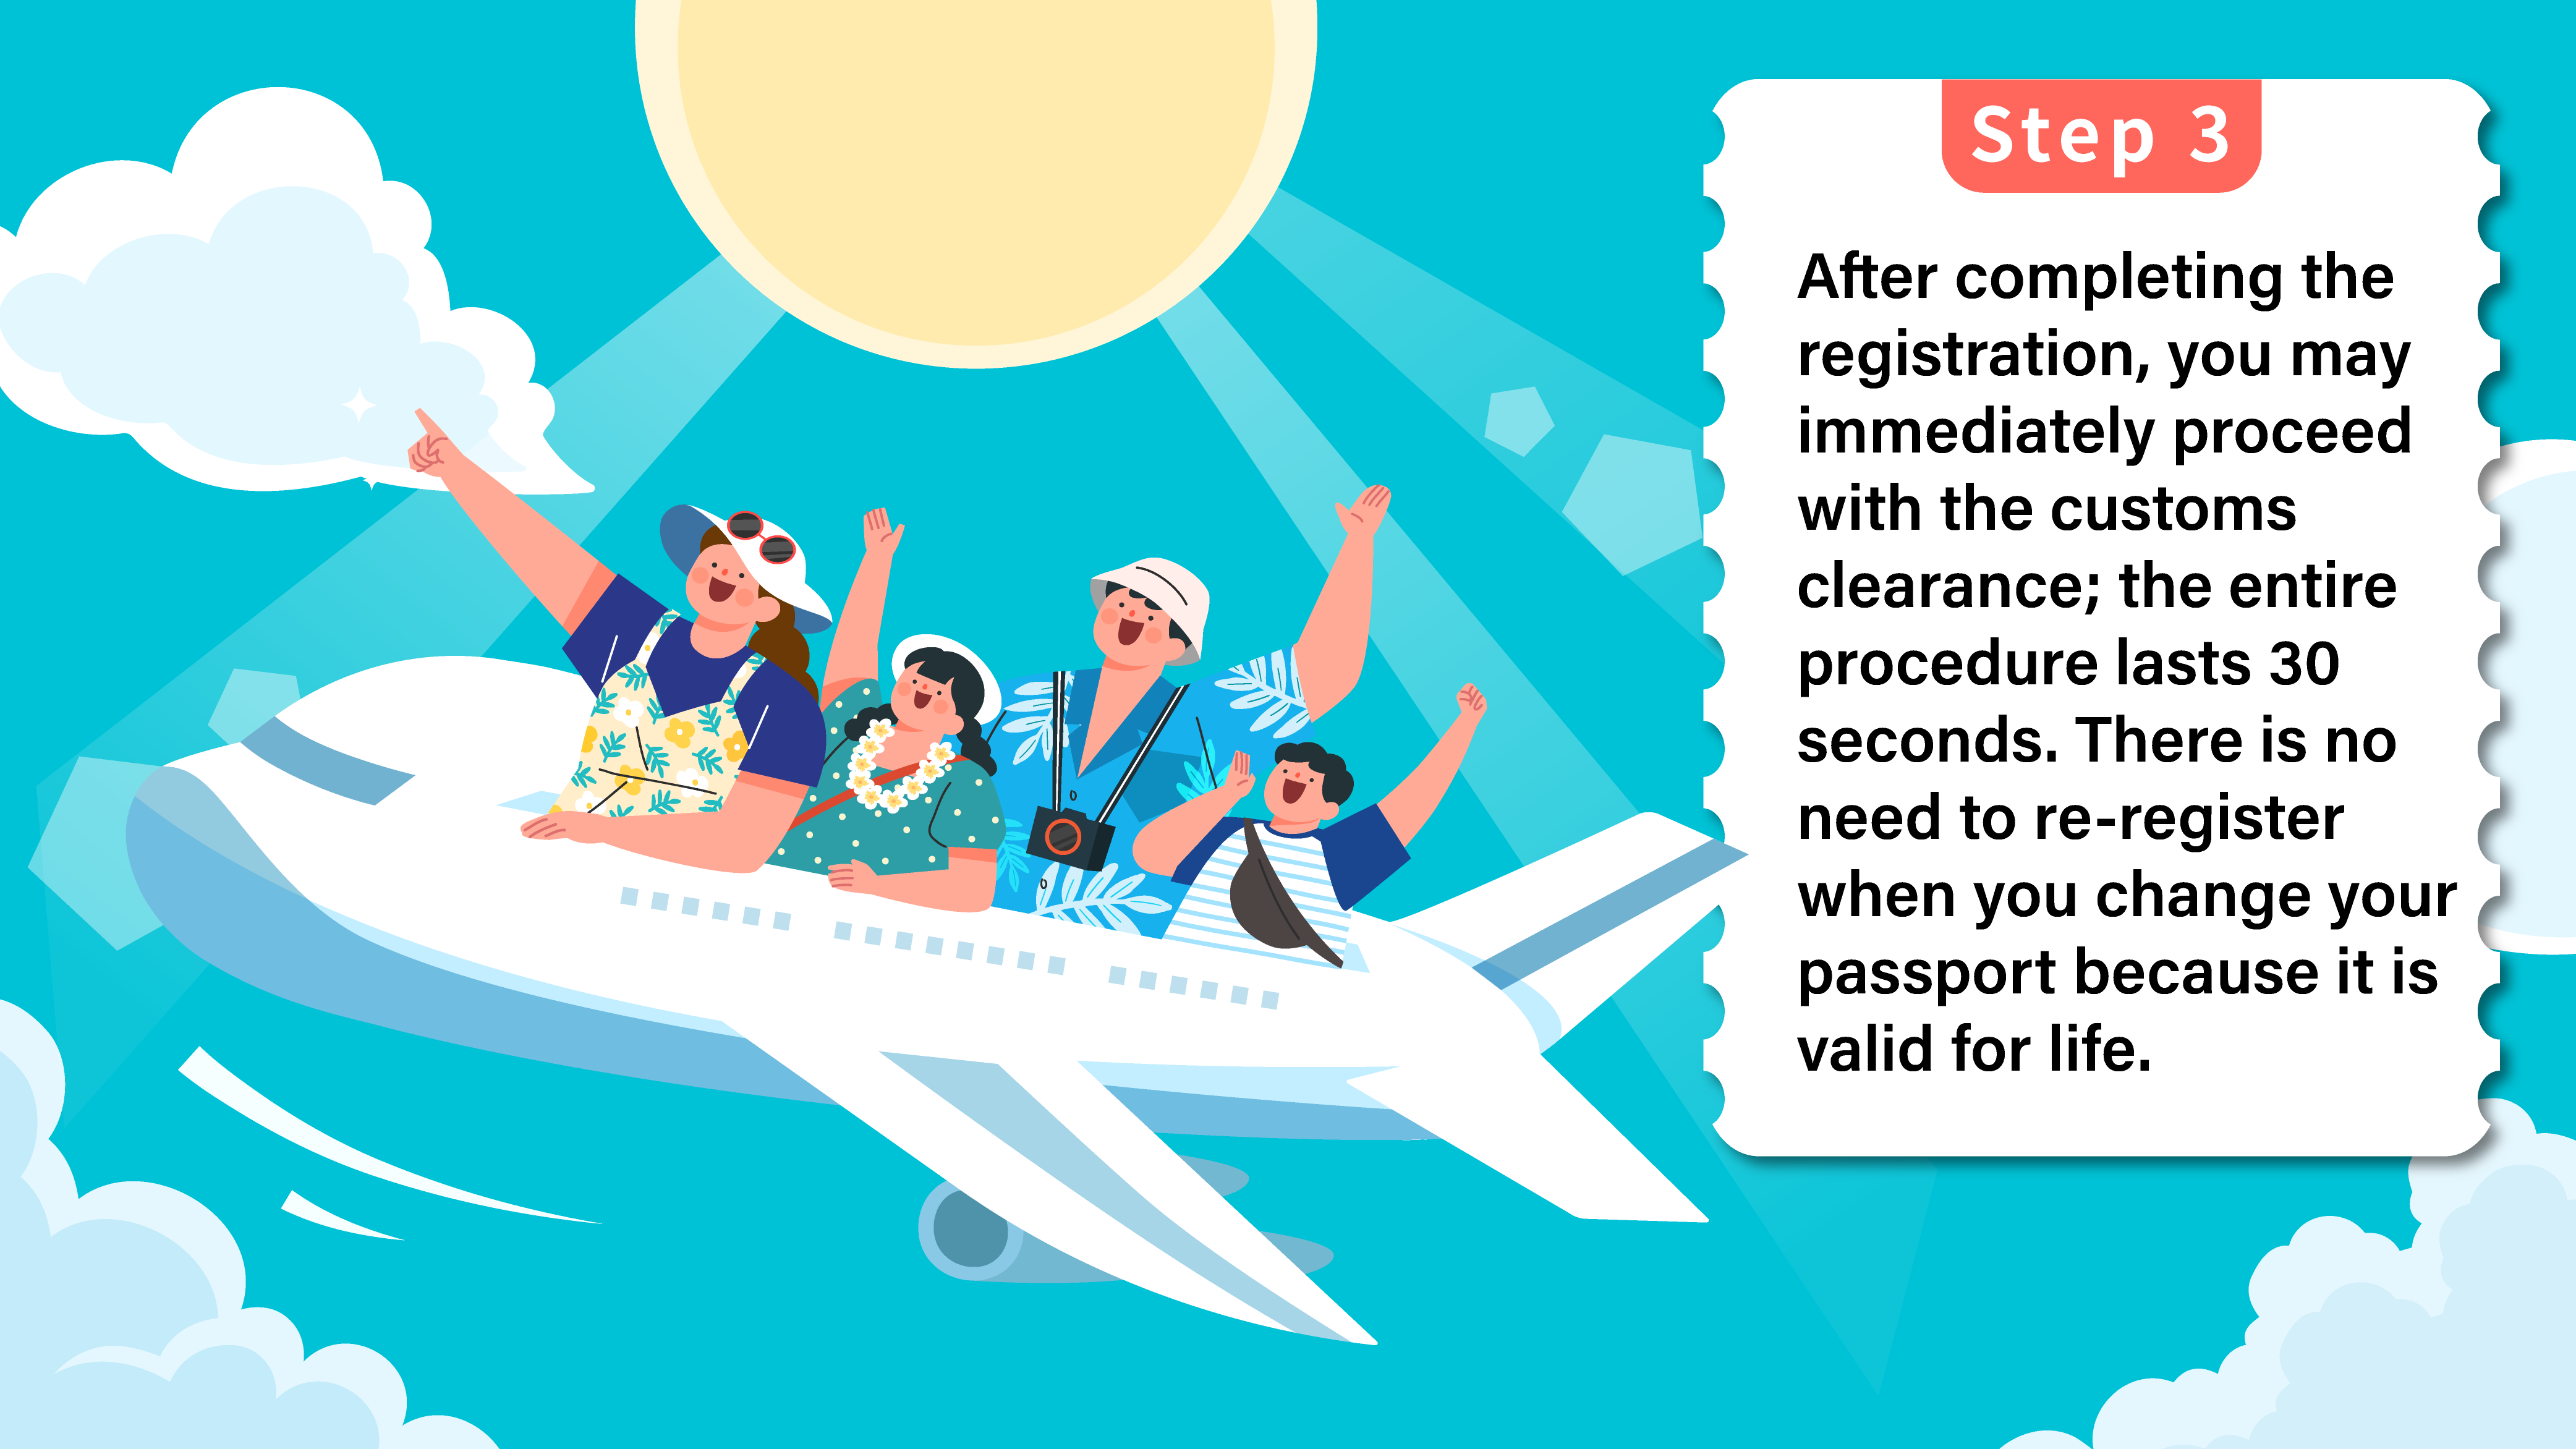 The general public are advised to take advantage of two-in-one upgraded service for registration and customs clearance when traveling on summer vocation